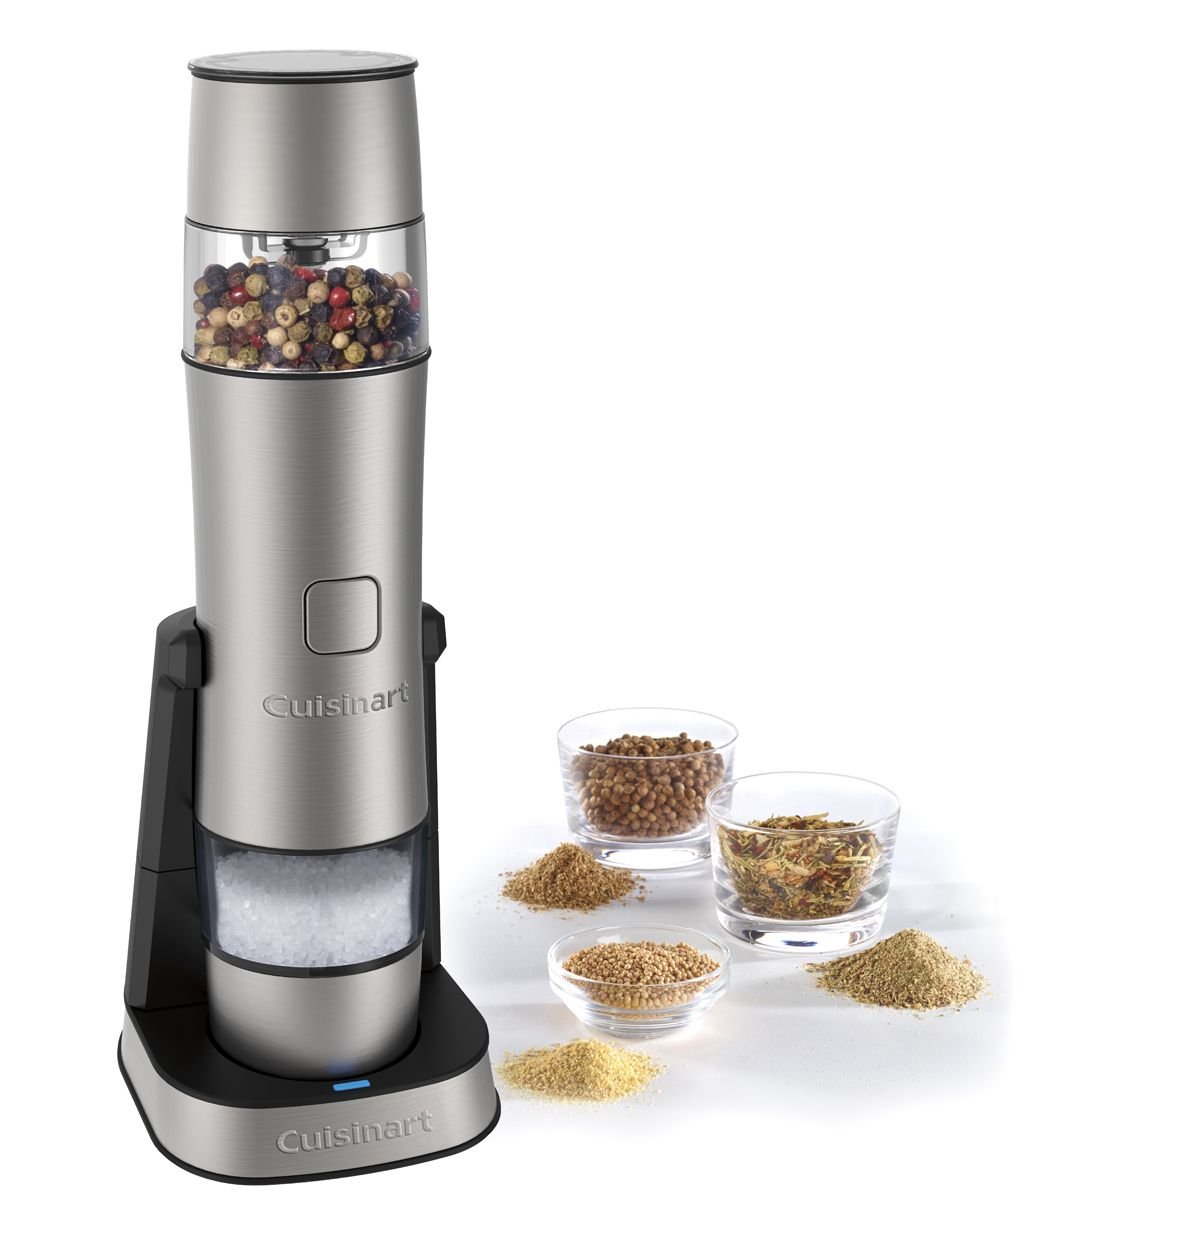 Cuisinart Coffee Grinder, Culinary-Machines